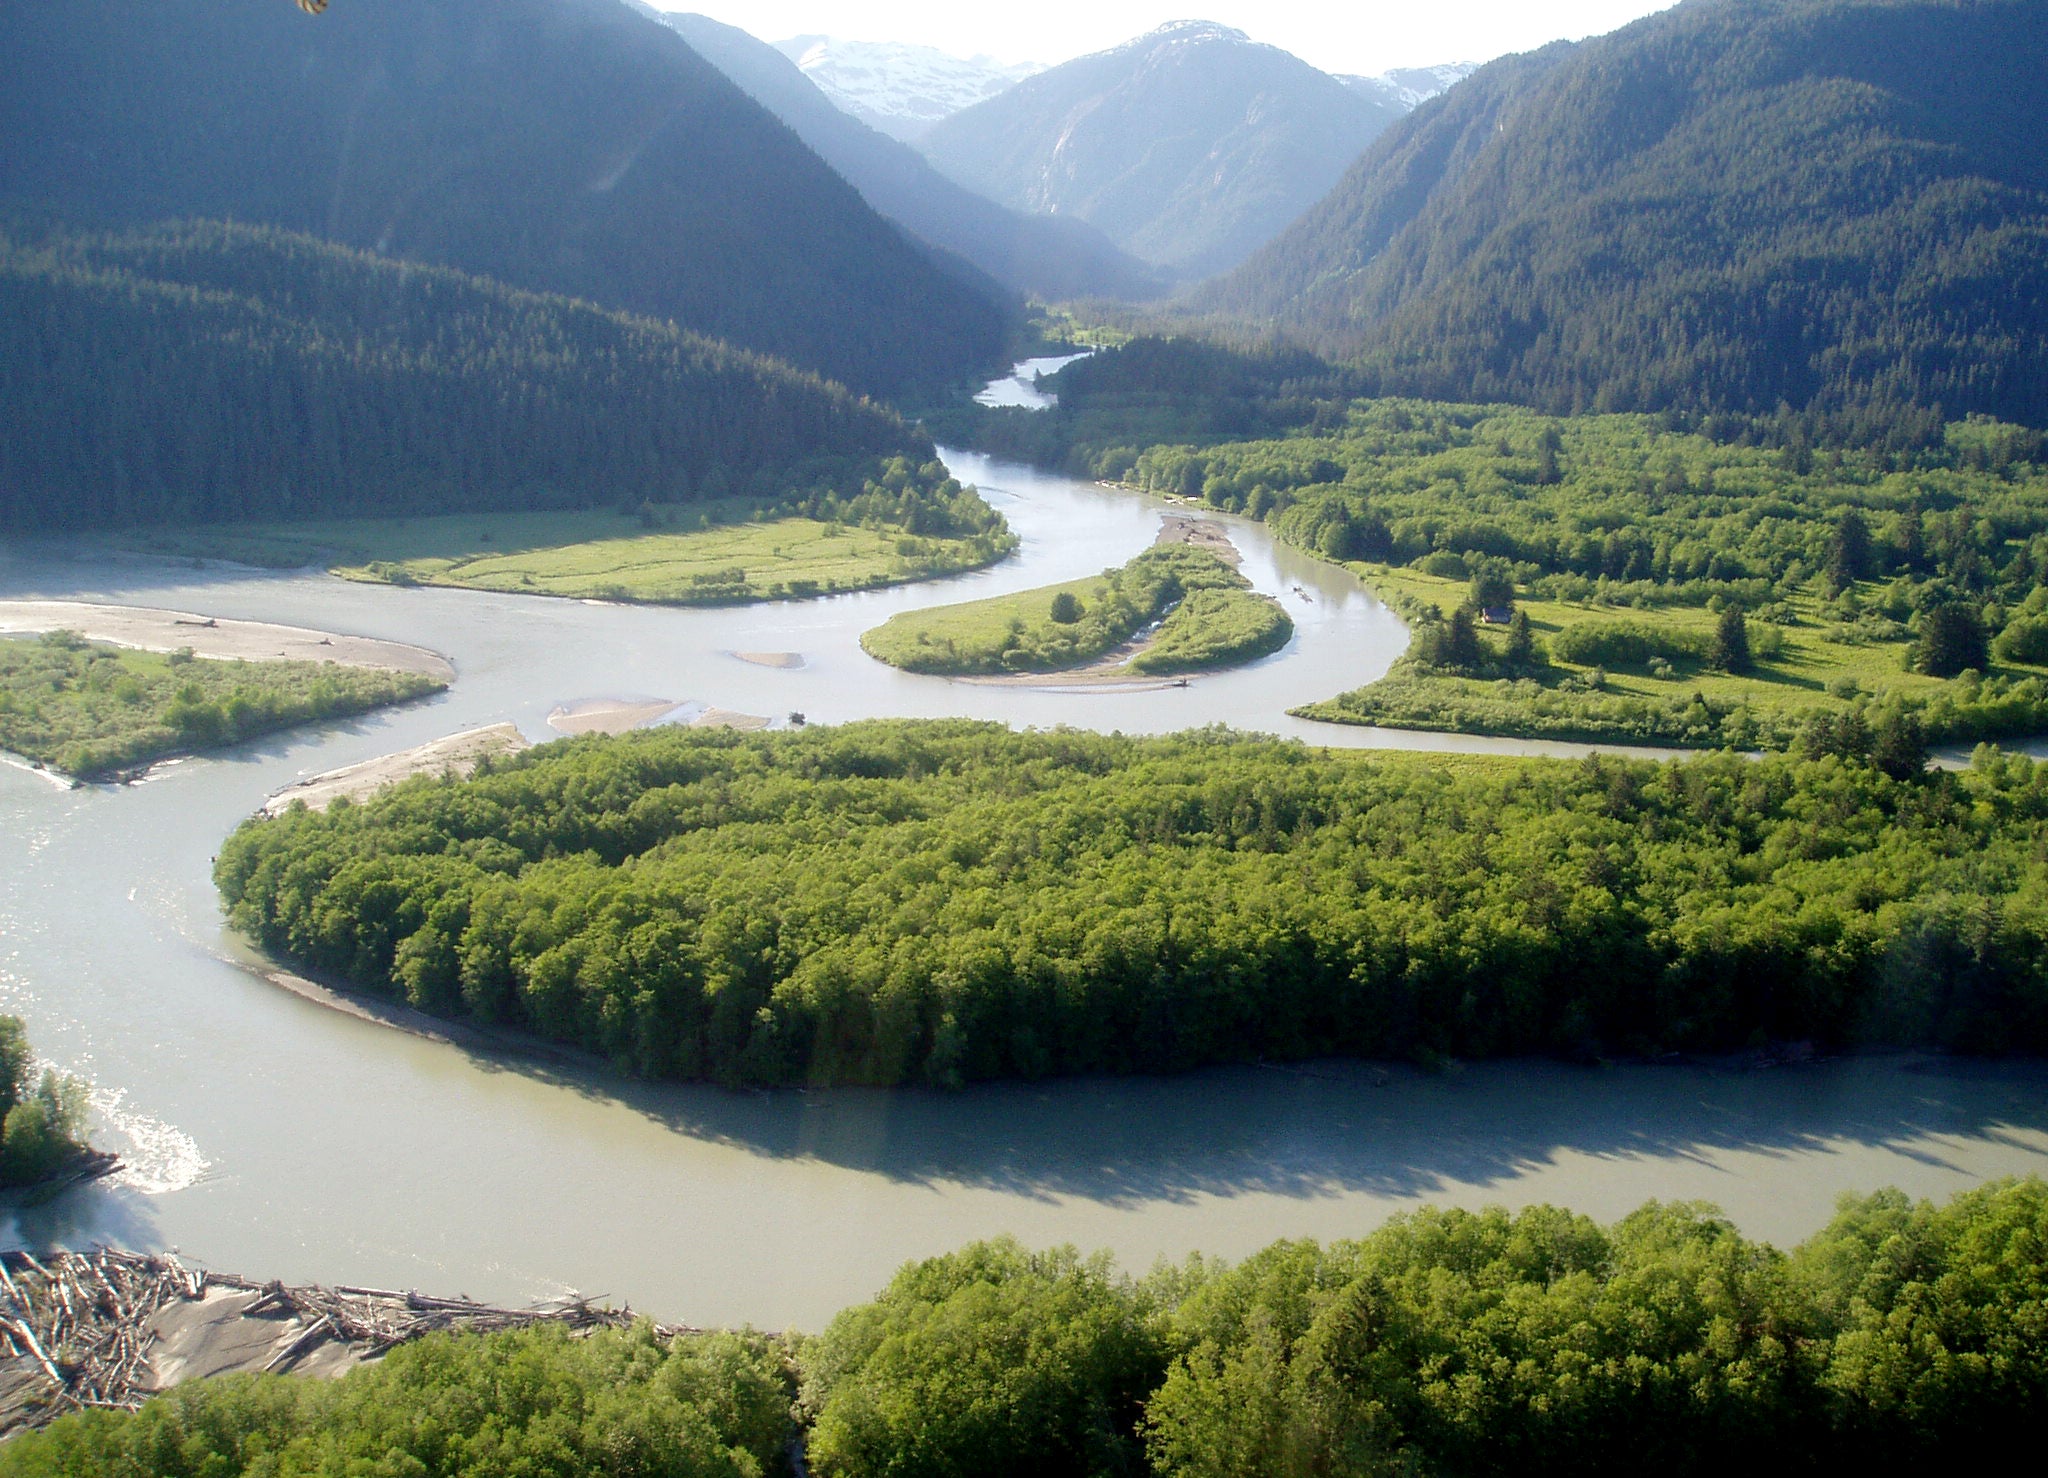 Unuk River is one of the transboundary watersheds of southeast Alaska. (USGS)